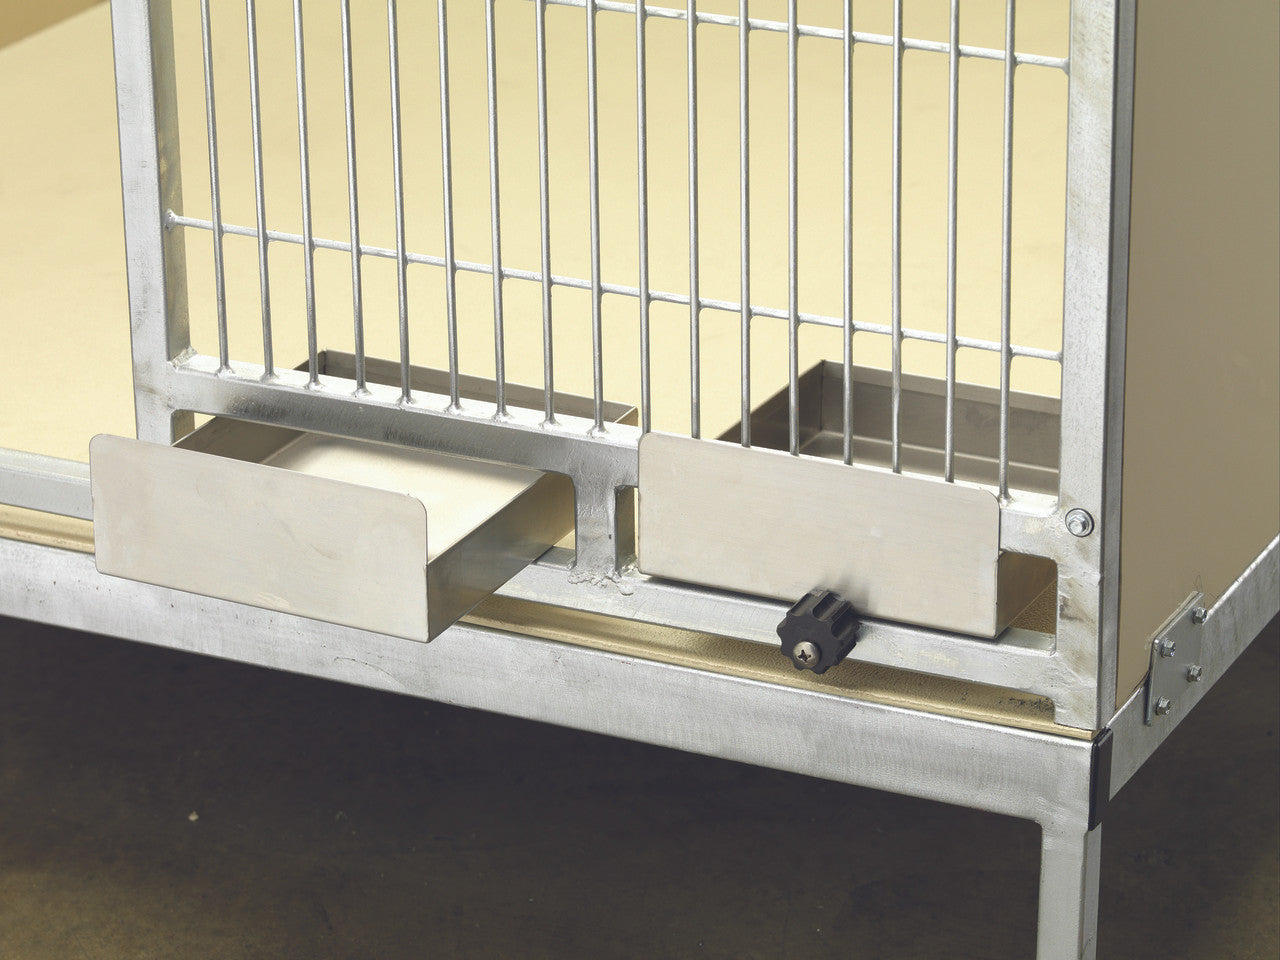 Shor-Line T-KENNEL STAINLESS STEEL FEED TRAY